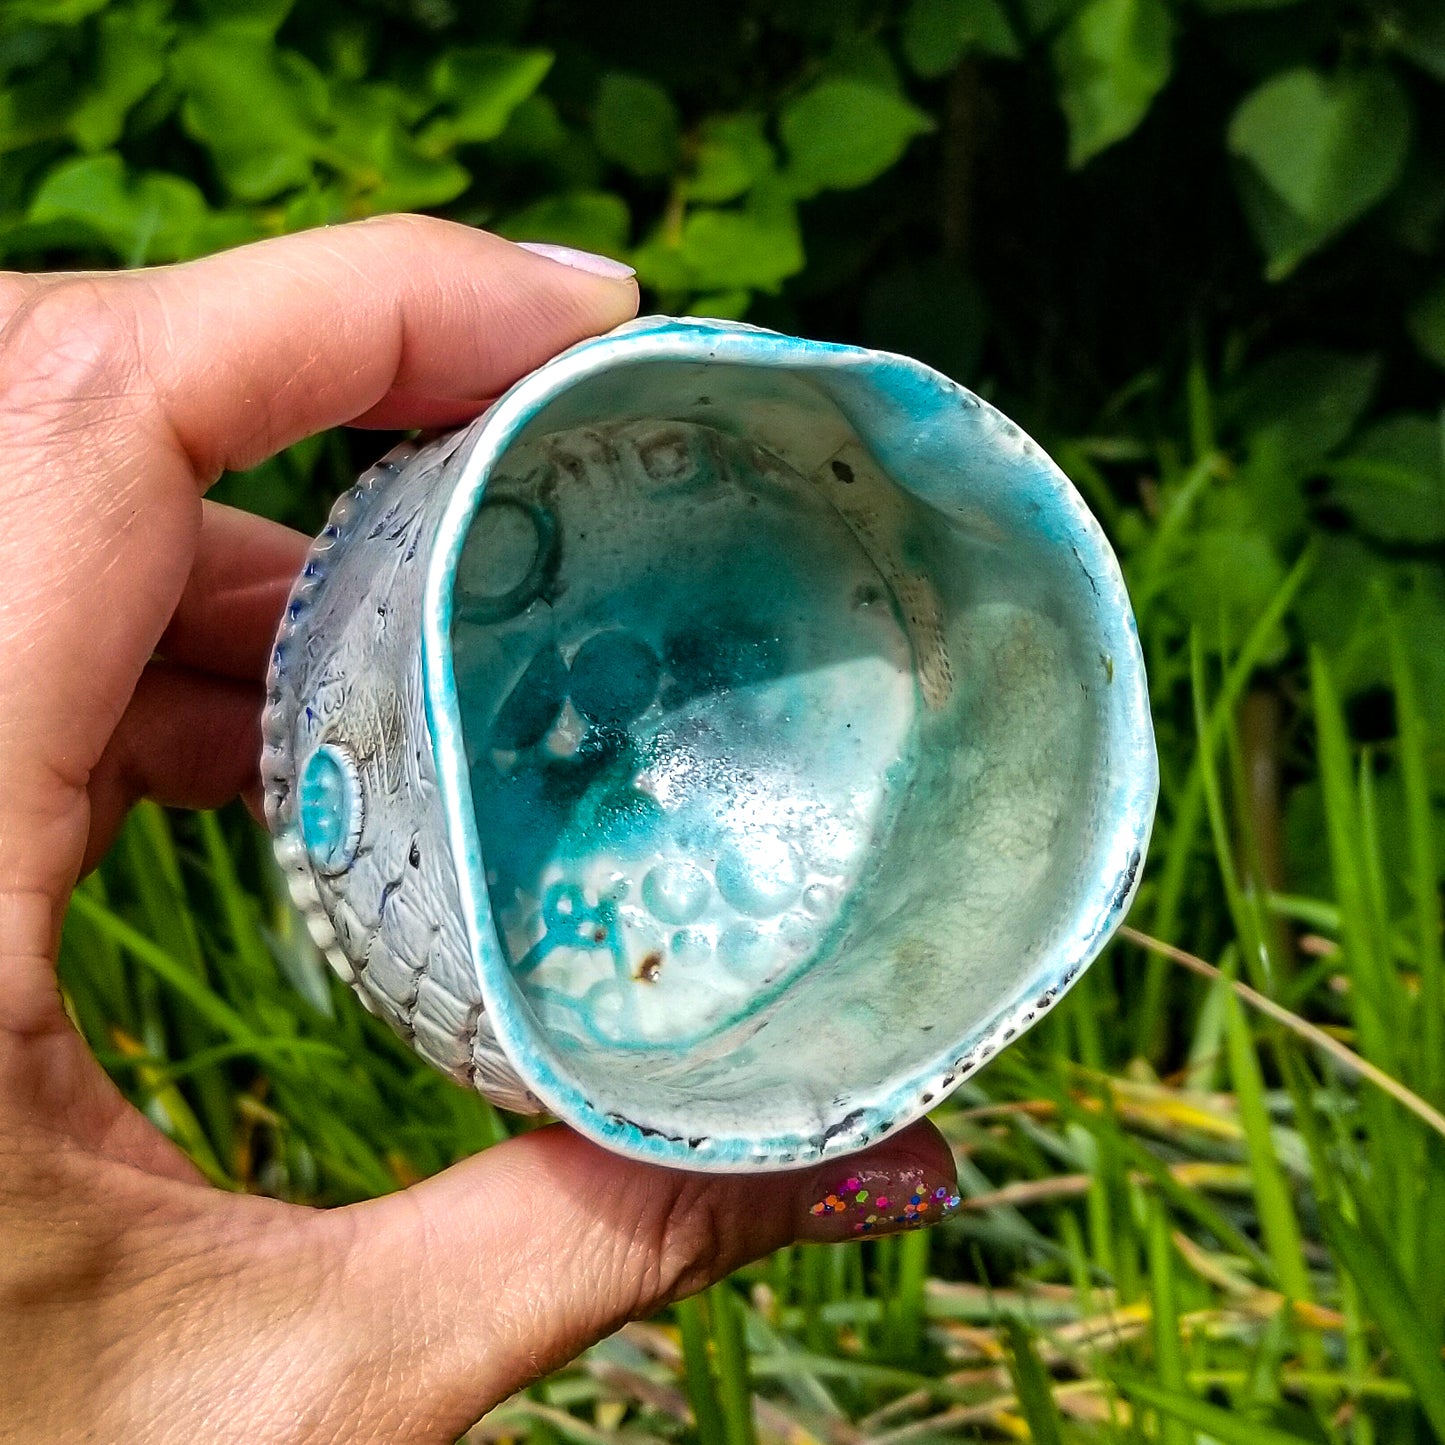 Inside detail of handmade stoneware ceramic soda fired cup blue color with pressed textures